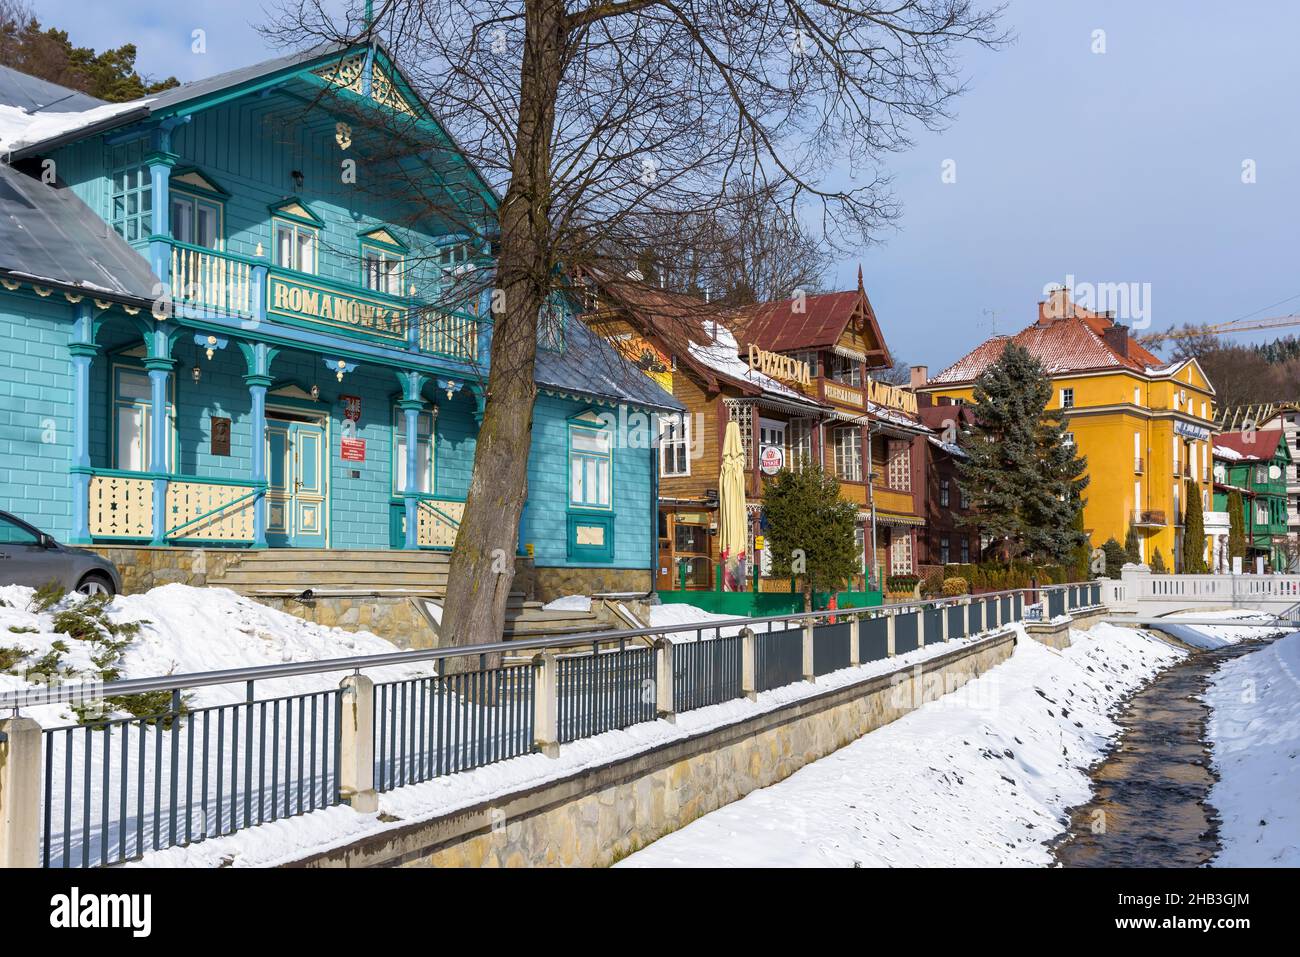 Krynica Zdroj, Poland - January 29, 2020: Winter view of historic buildings at Dietls Boulevards in Krynica Zdroj, famous spa town in southern Poland Stock Photo